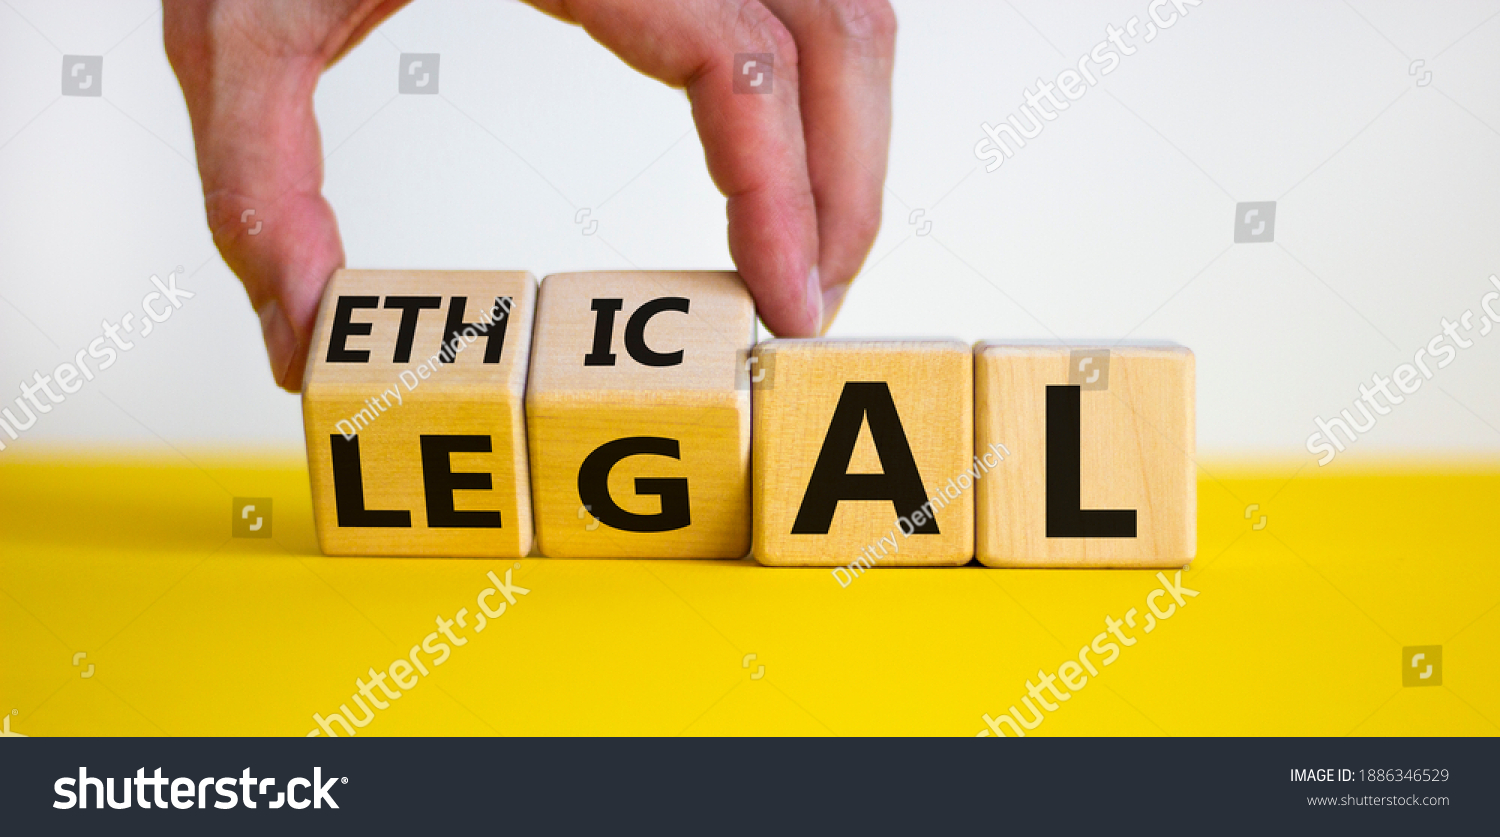 Ethical or legal symbol. Businessman hand turns wooden cubes and changes the word 'legal' to 'ethical' on a beautiful yellow table, white background. Business and ethical or legal concept. Copy space. #1886346529